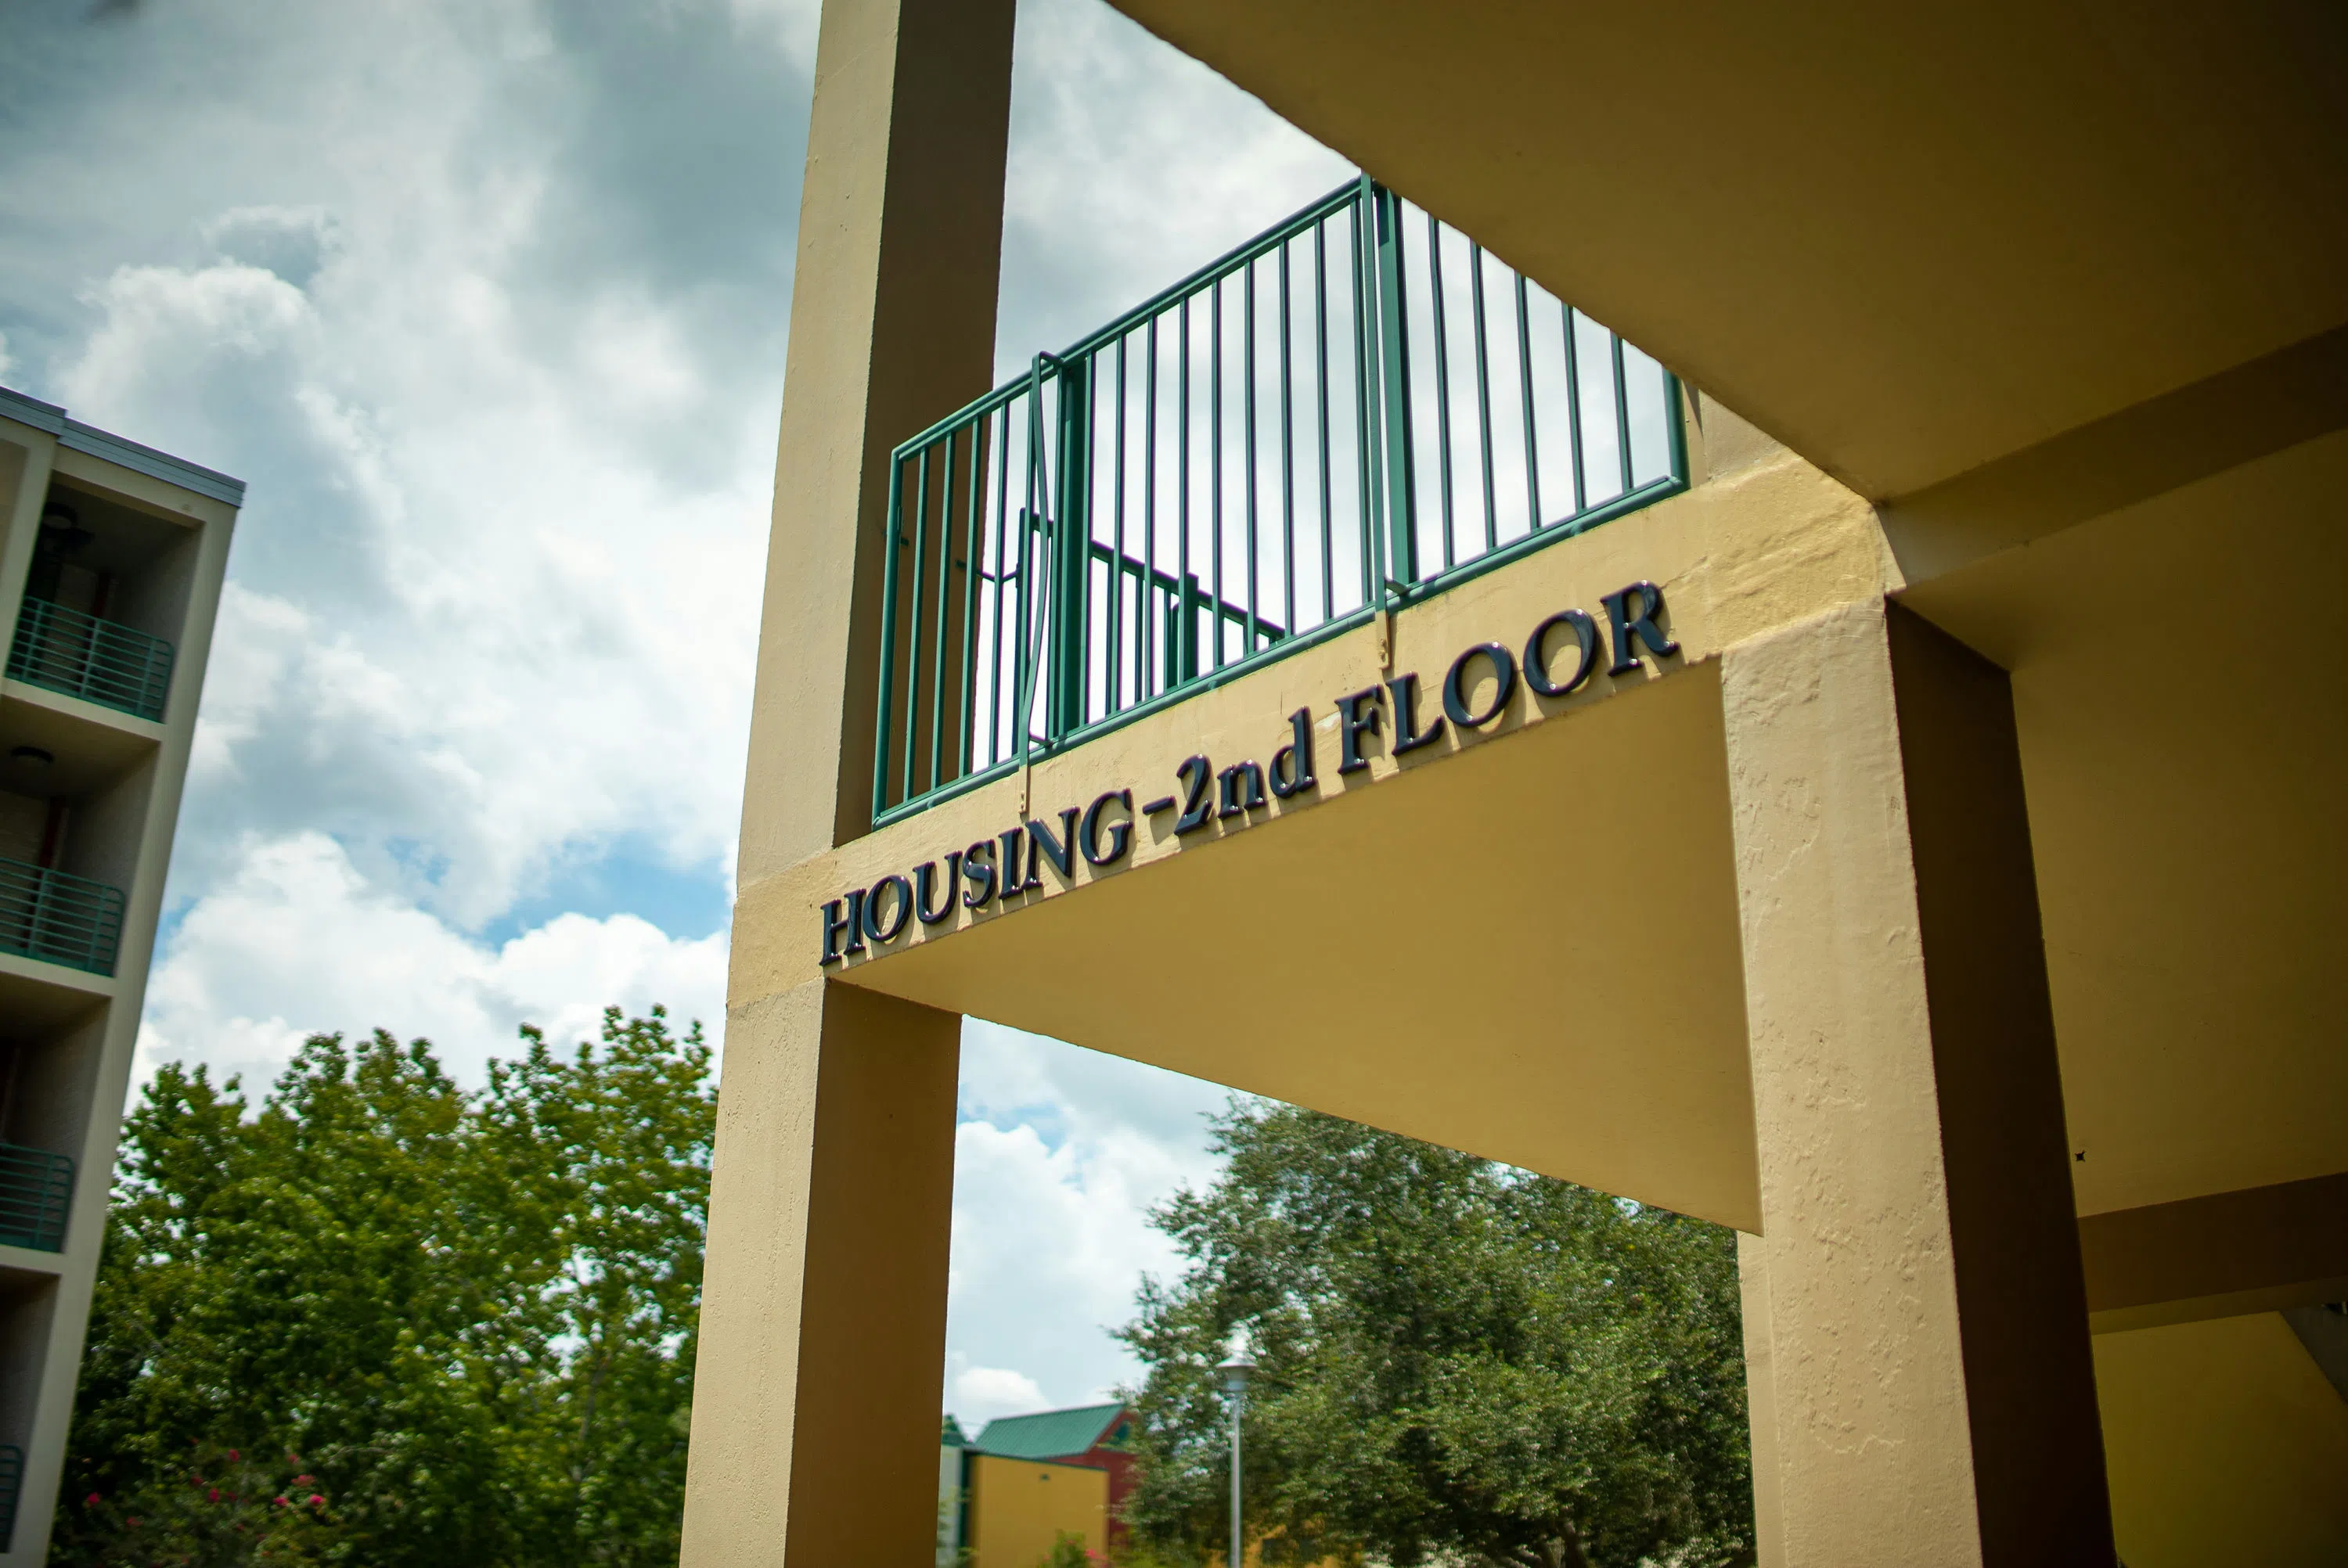 Signage that reads "Housing - 2nd Floor"